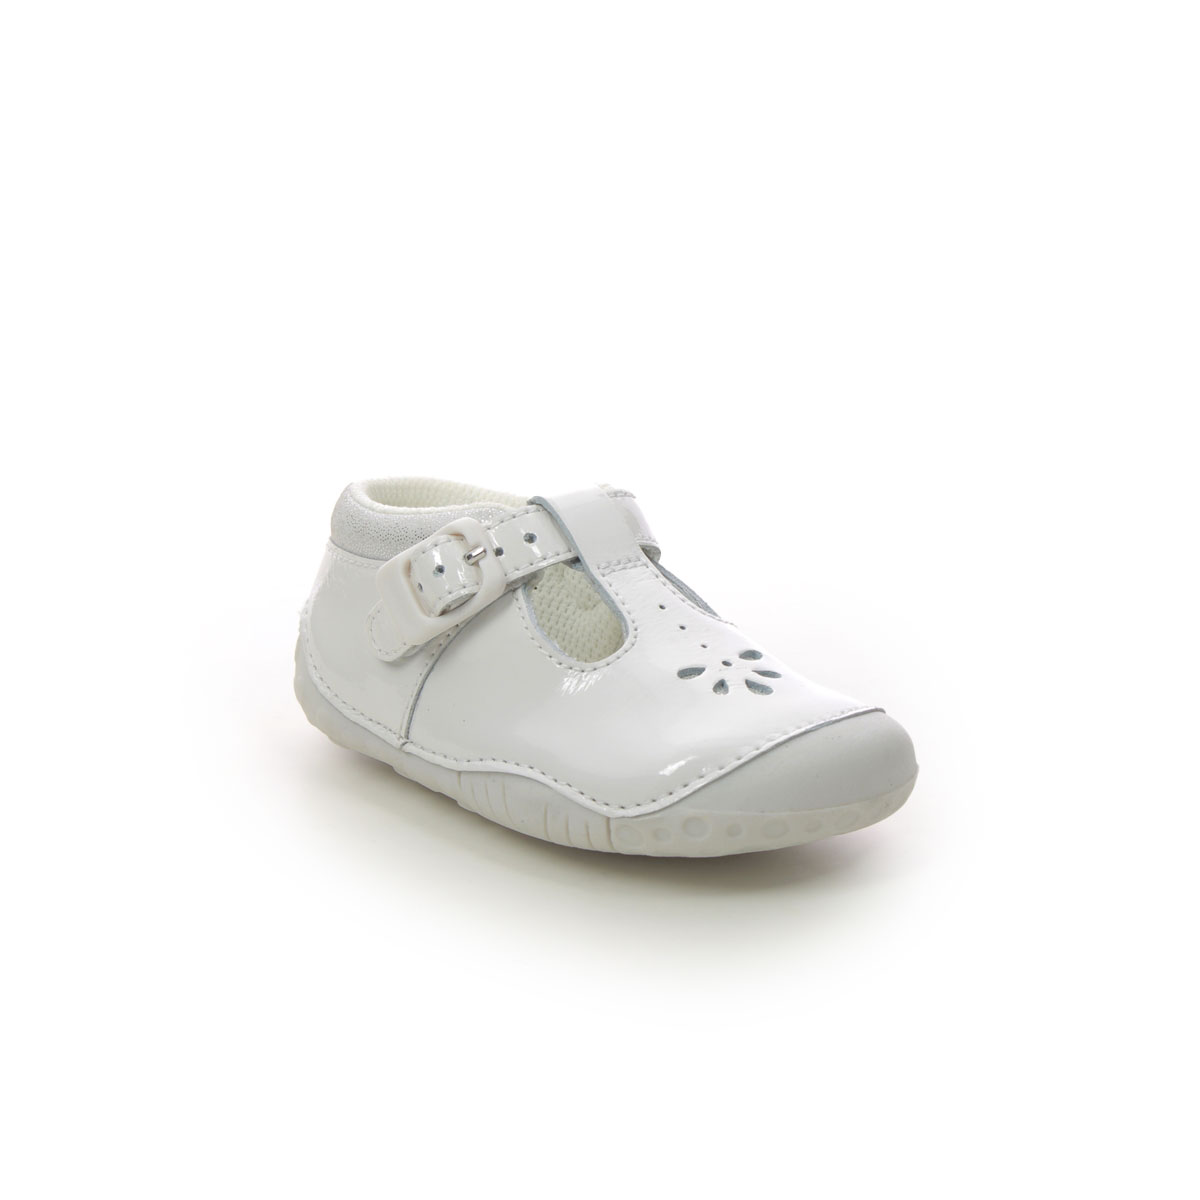 Start Rite - Baby Bubble In White Patent 0773-14G In Size 3.5 In Plain White Patent First And Baby Shoes  In White Patent For kids